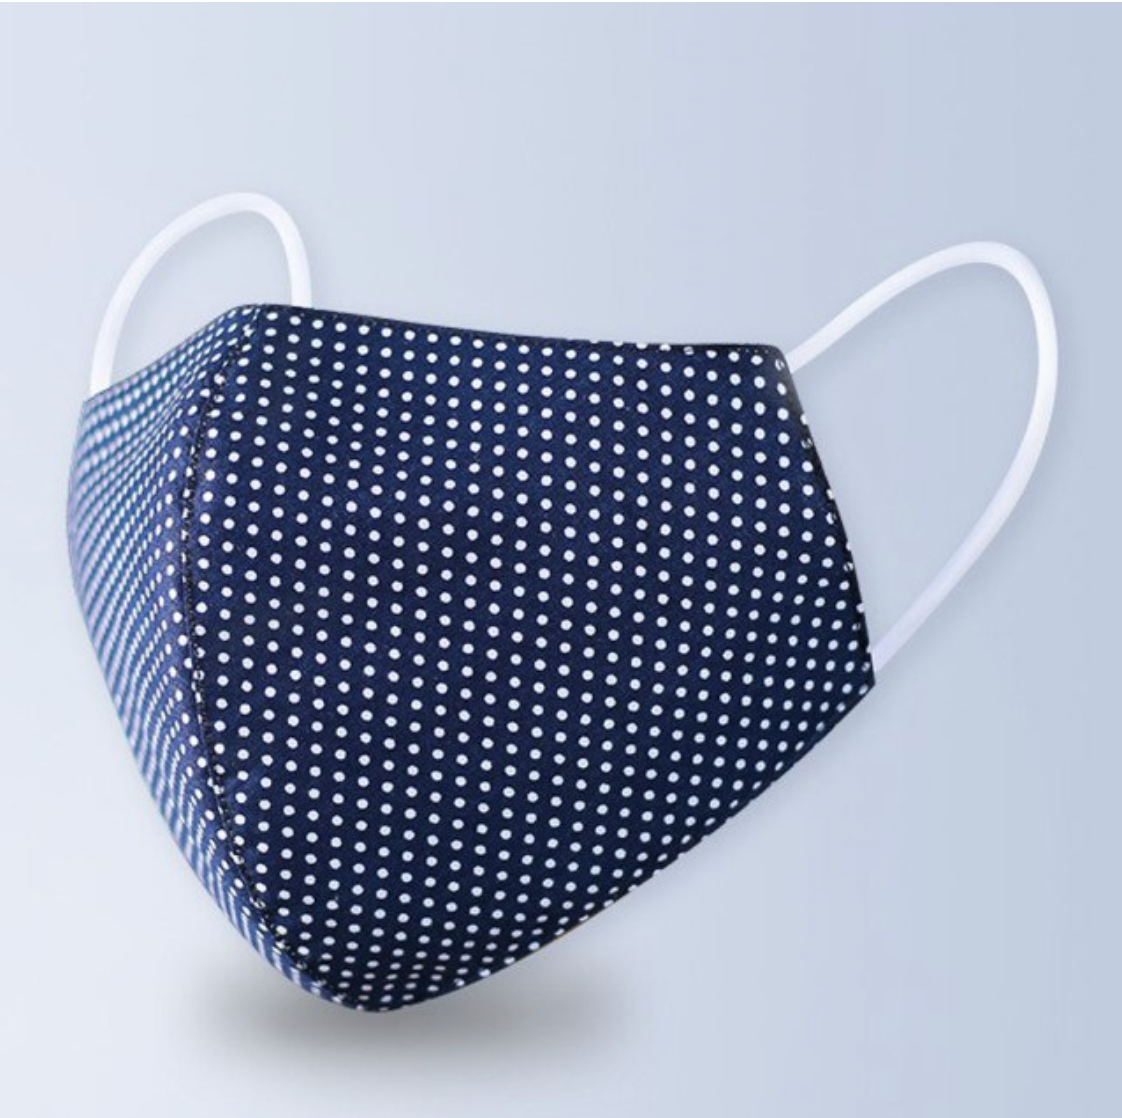 Dots and Stripes Cloth Face Masks for Women